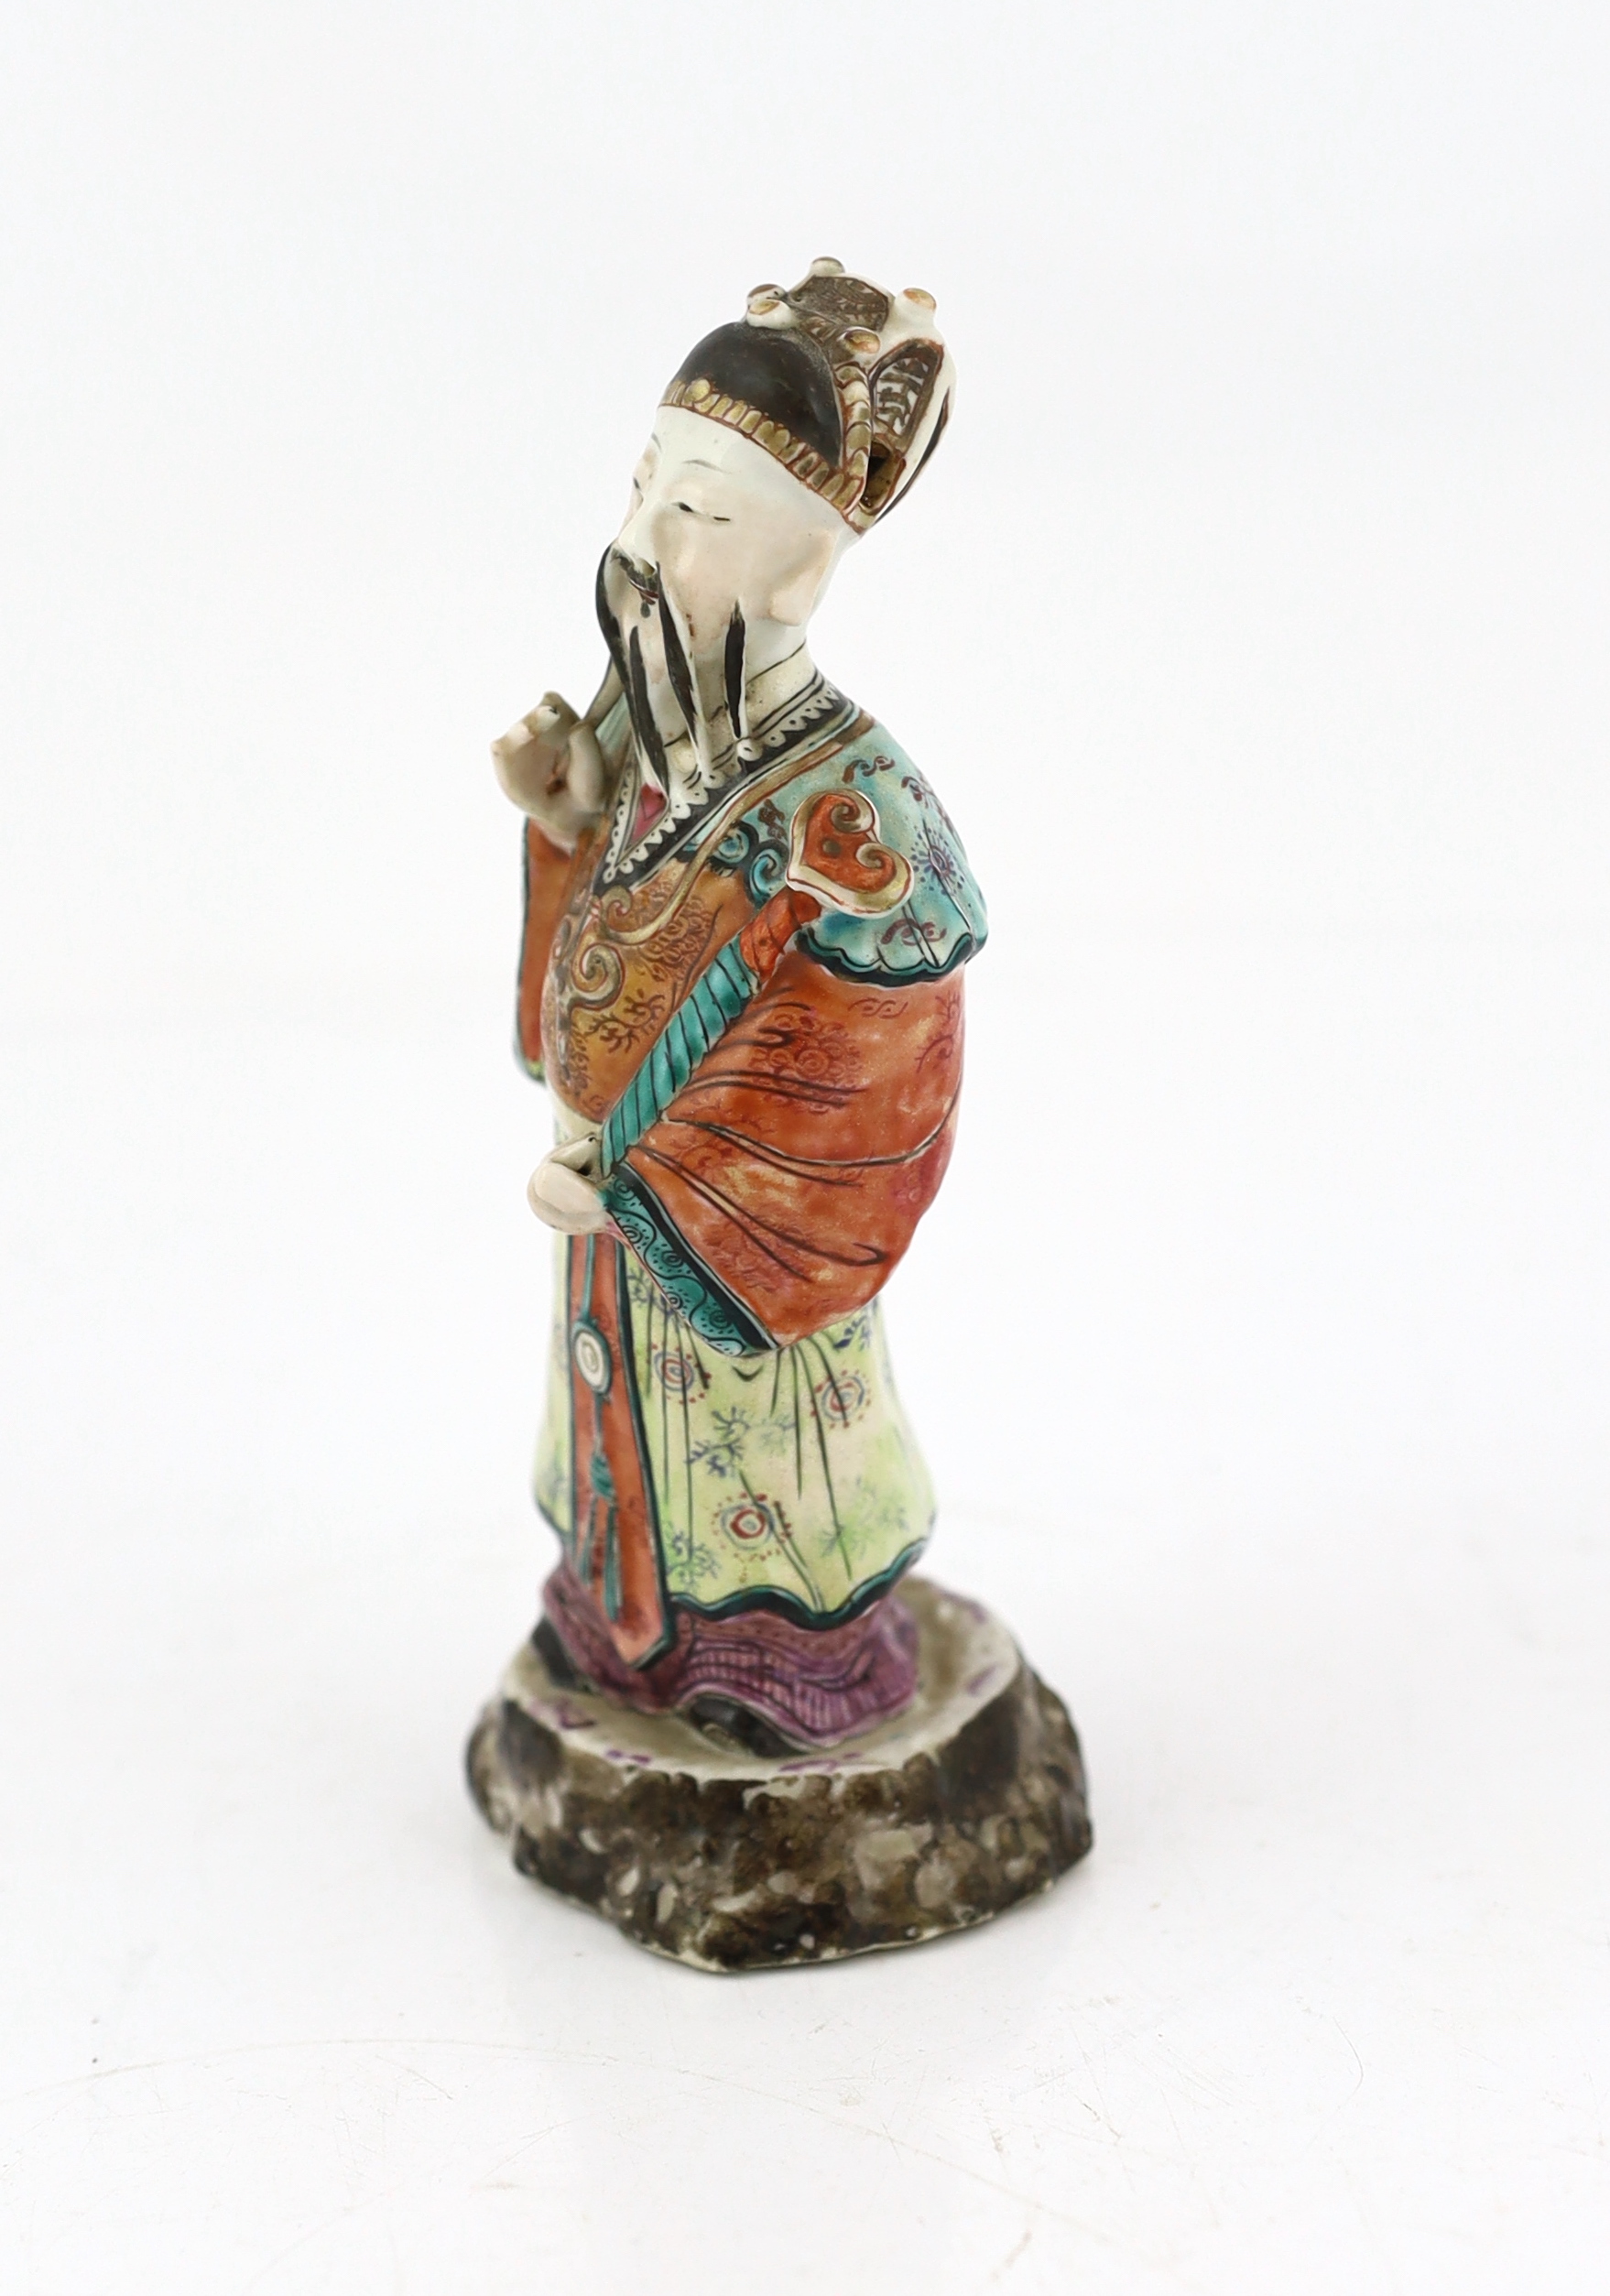 A Chinese enamelled porcelain figure of a court official, Jiaqing period (1796-1820), loss to right index finger